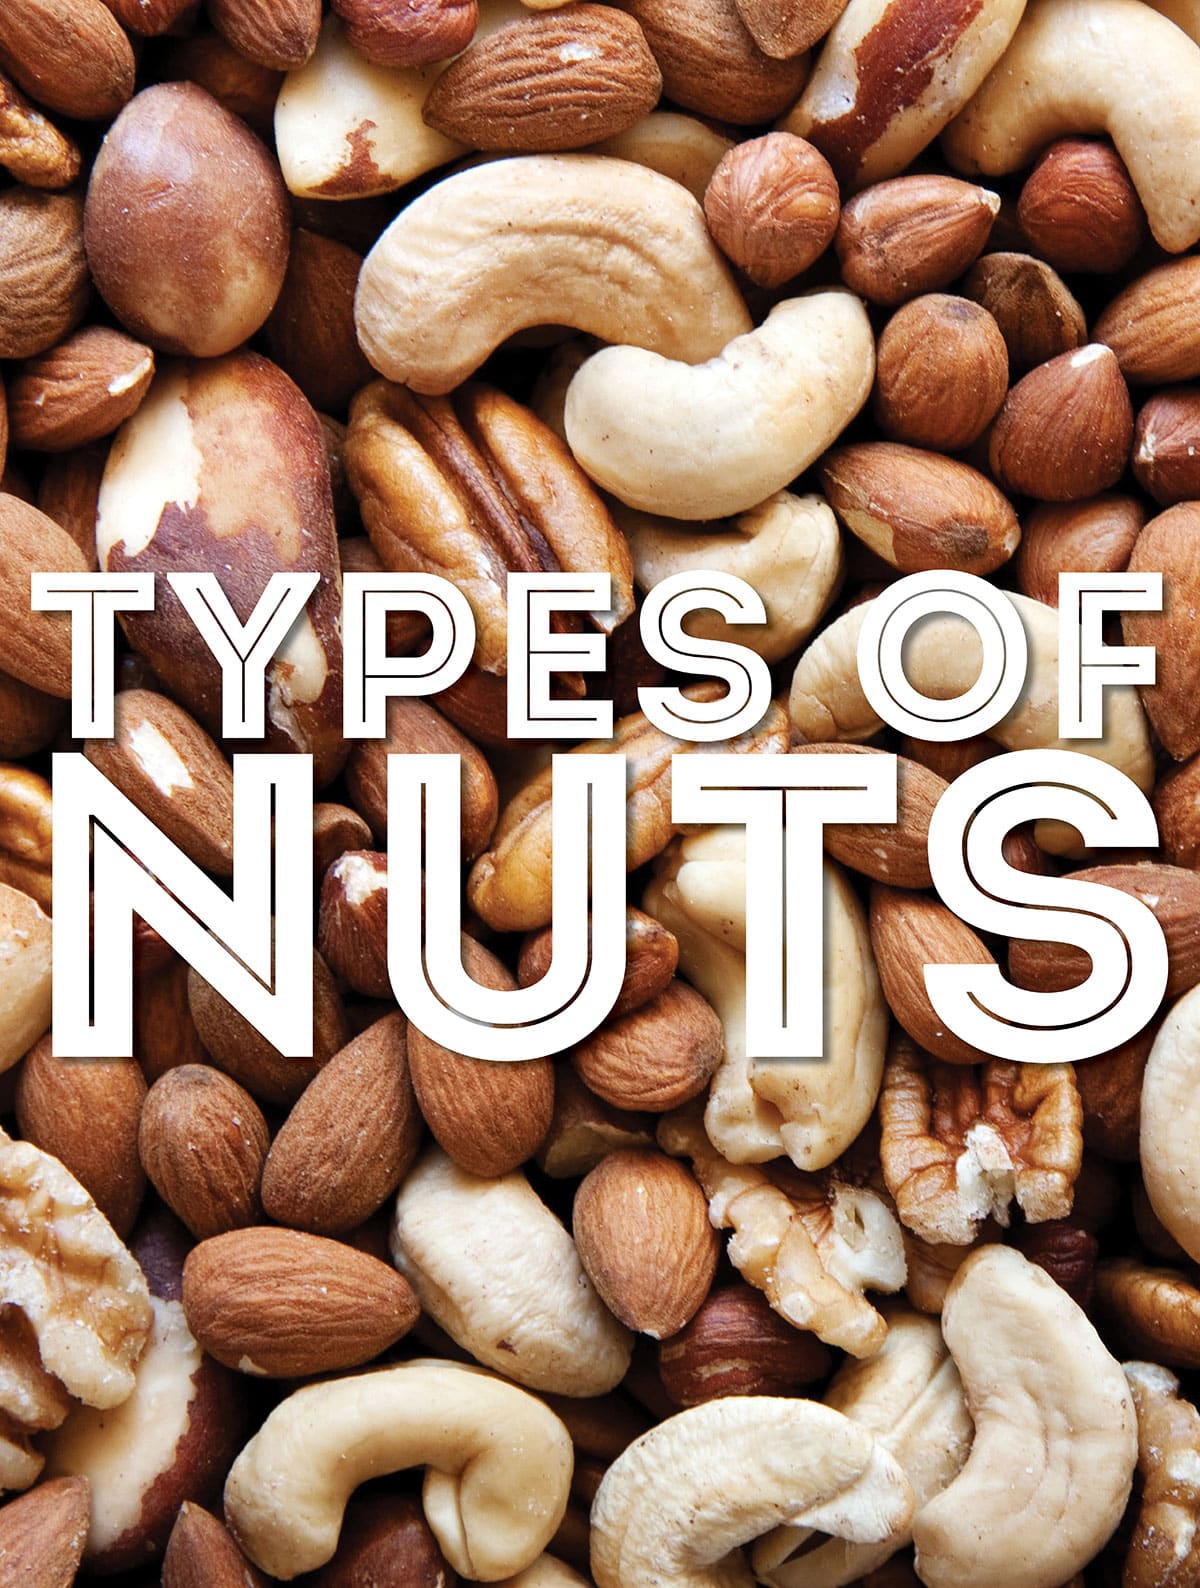 Collage that says "types of nuts".